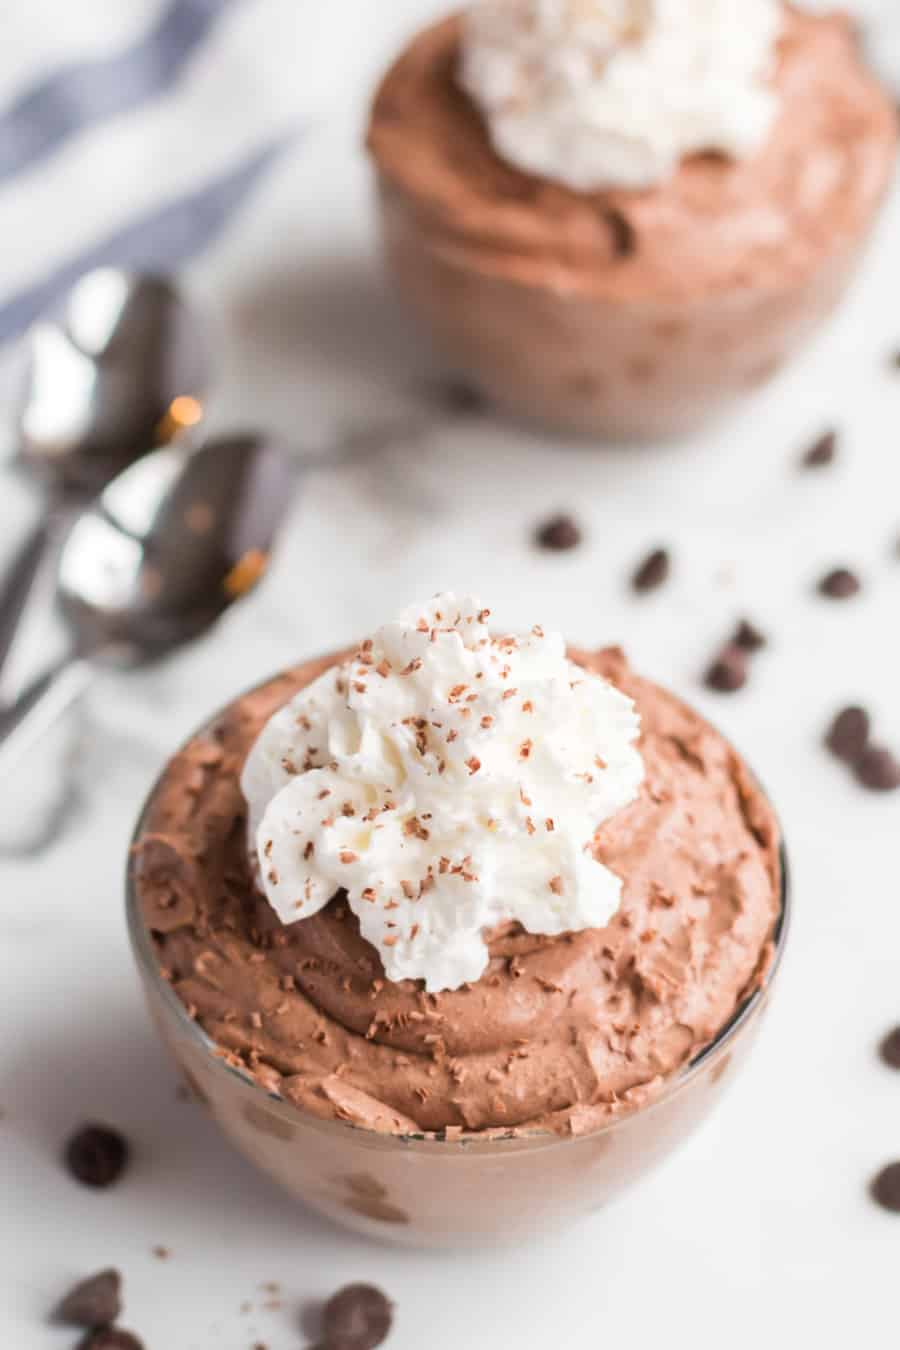 Small glass serving bowl filled with chocolate mousse that's topped with whipped cream and chocolate shavings, there are two spoons and another small bowl of mousse in the background. 